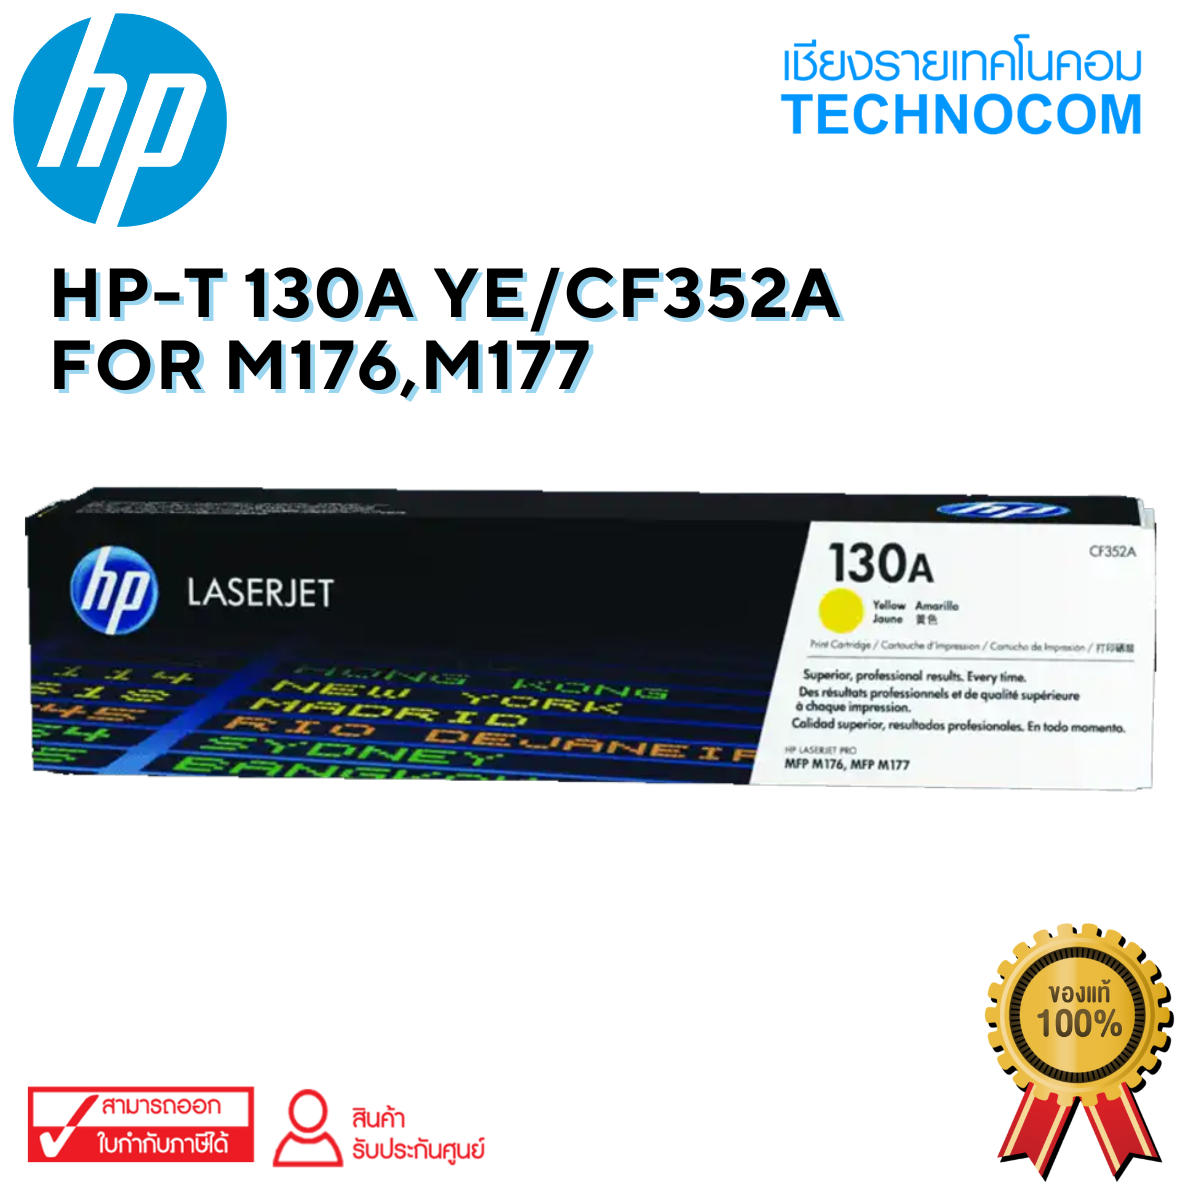 HP-T 130A YE/CF352A For M176,M177